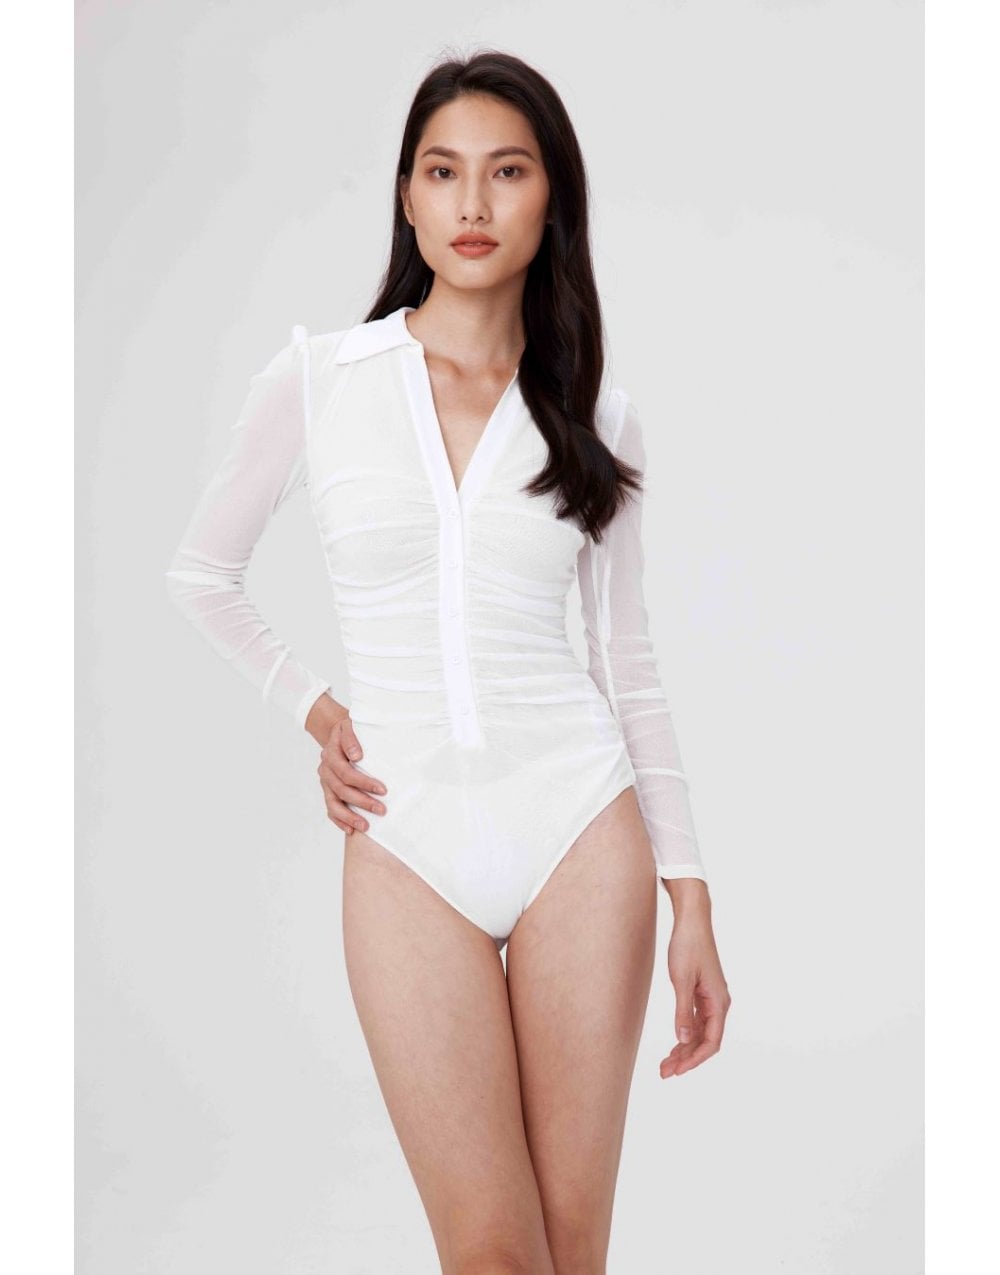 Diane Von Furstenberg Diane Von Furstenberg Giorgi Ruched Button Up Shirt Style Bodysuit Siz